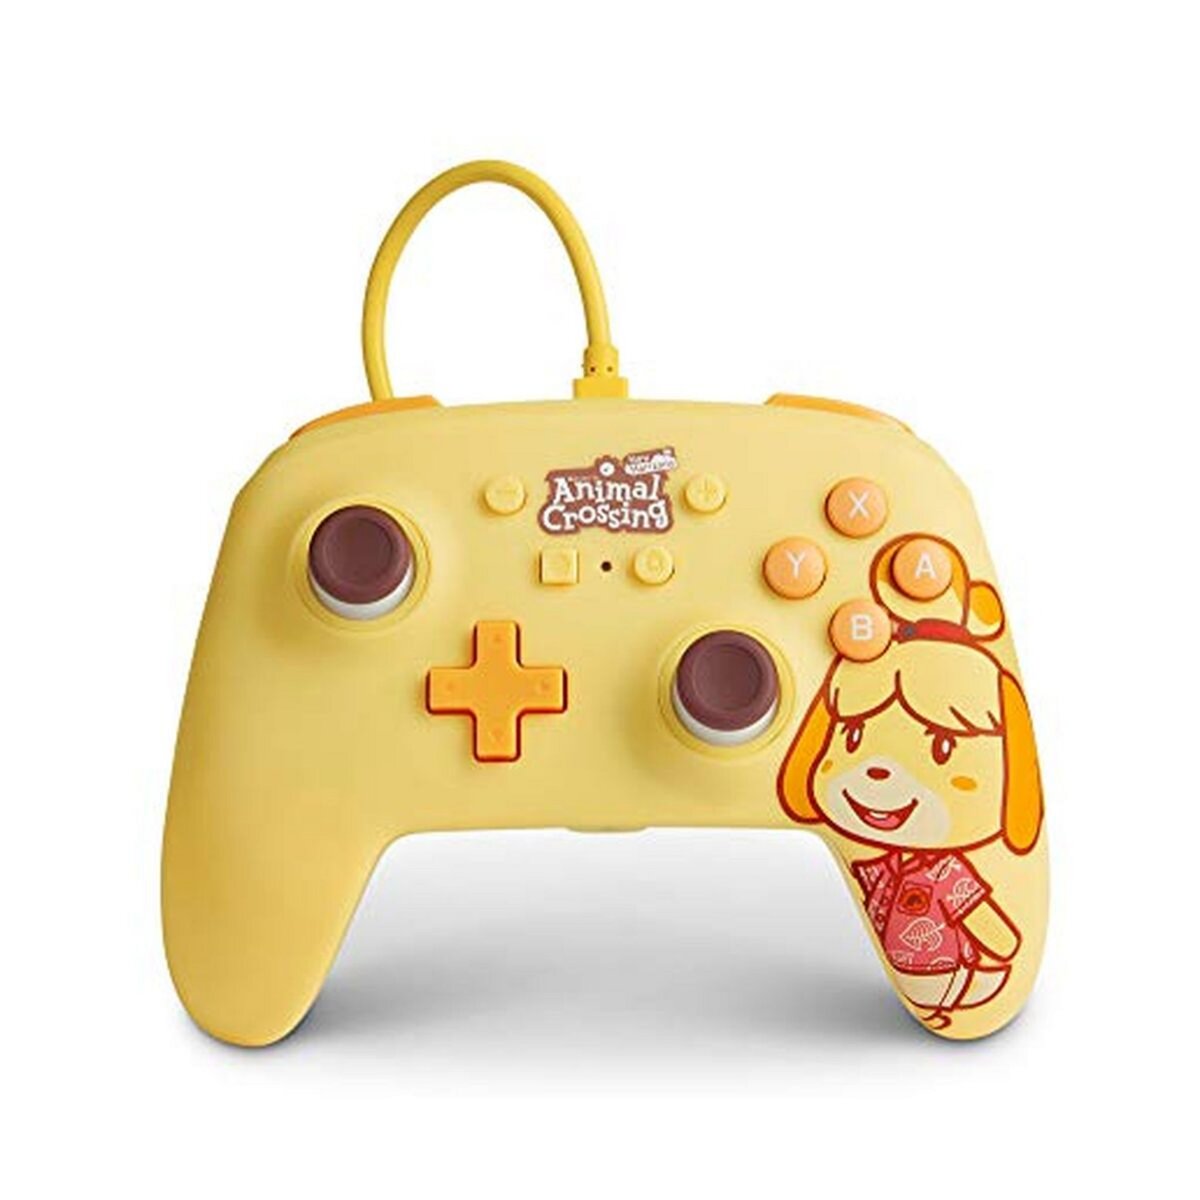 POWER A Manette Filaire Marie Animal Crossing Nintendo Switch